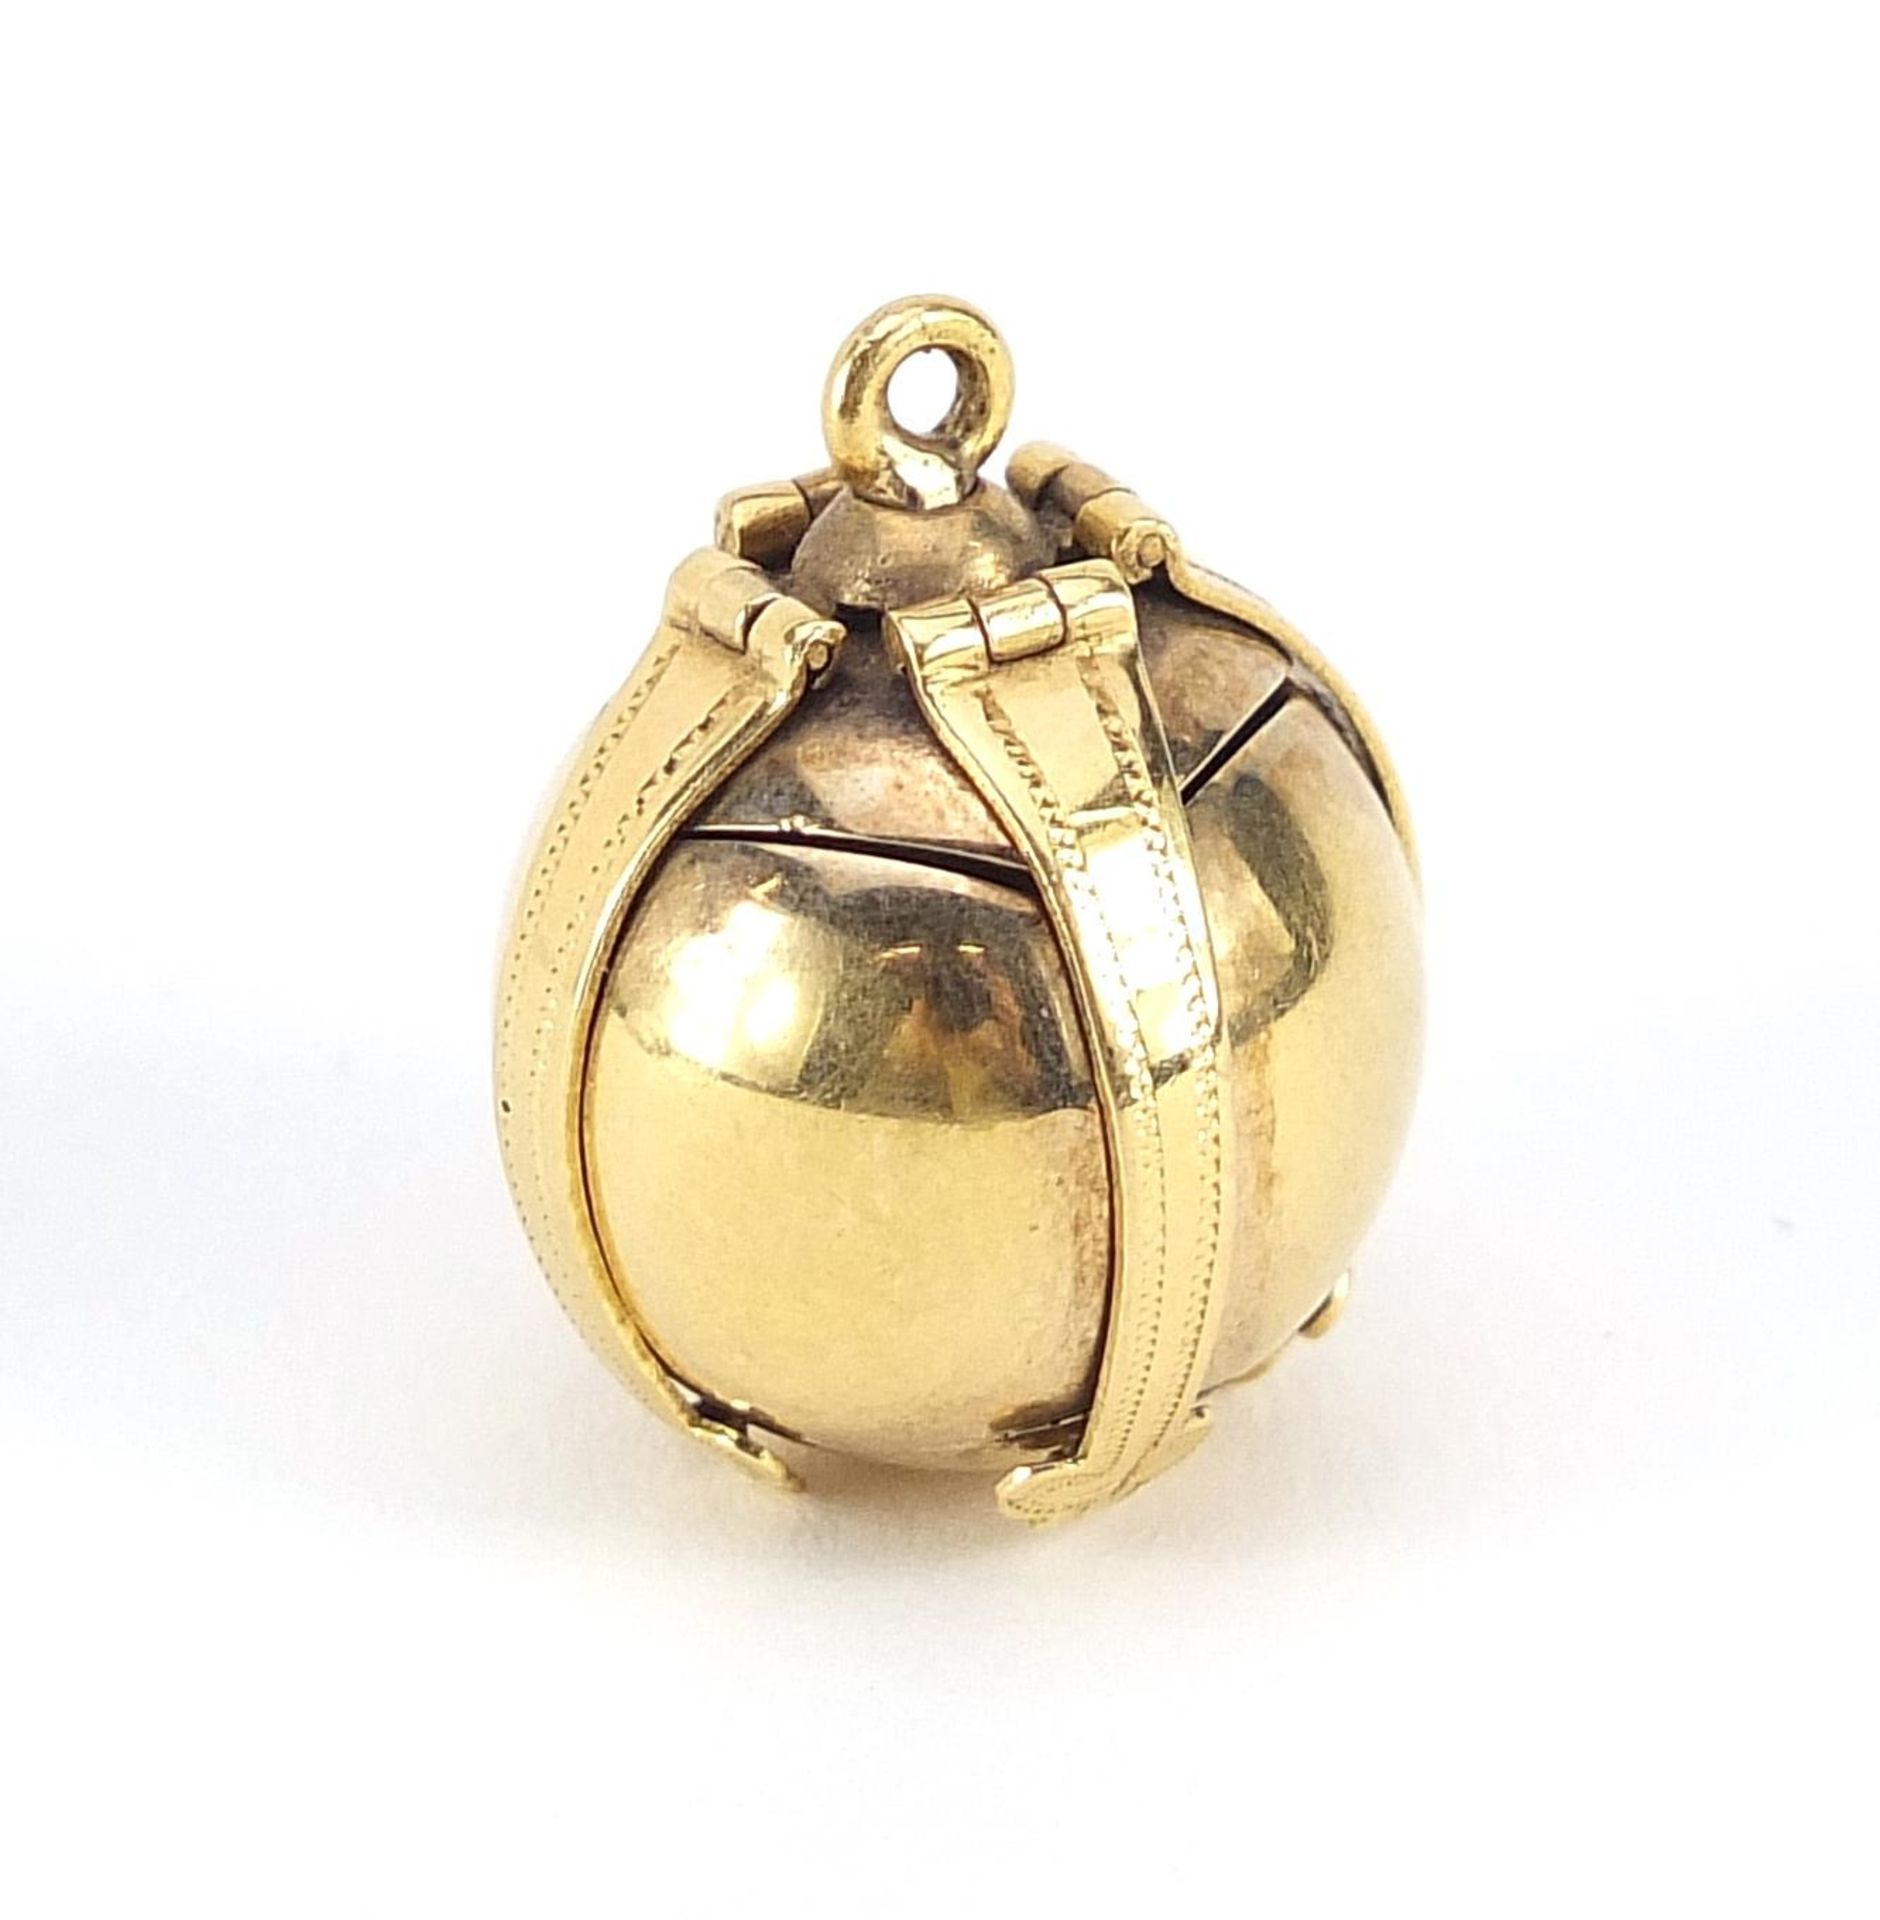 18ct gold cased silver folding masonic ball pendant, 4.4cm high when open, 13.8g - Image 5 of 5